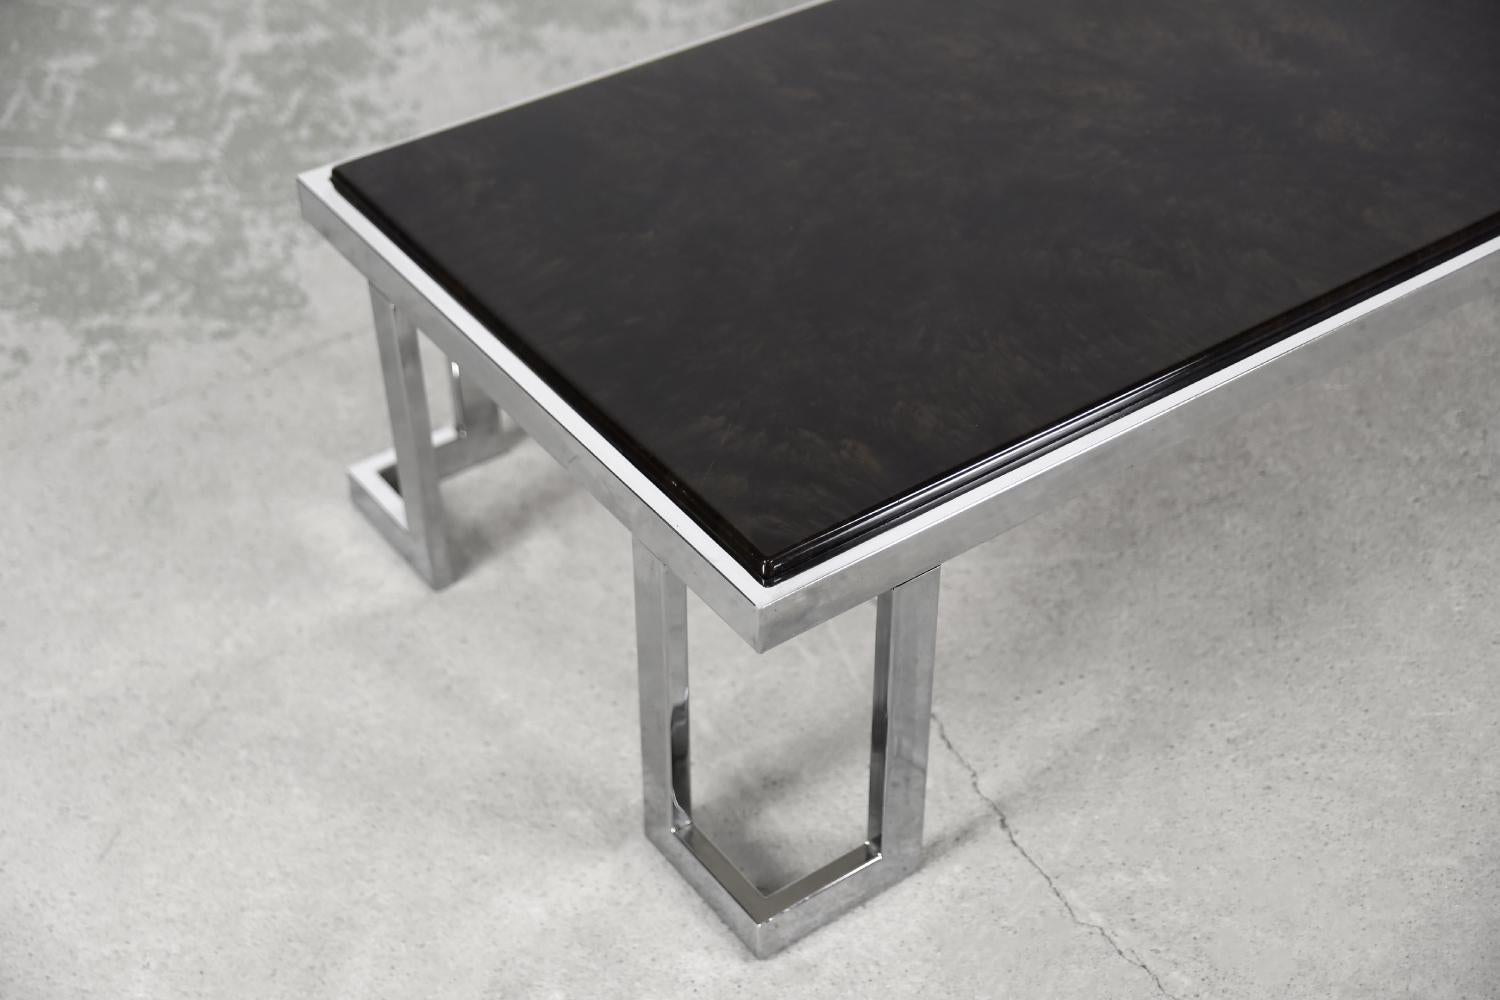 This brutalist coffee table was manufactured in Italy during the 1970s. The geometrical frame is made from chrome-plated metal. The top is made from epoxy resin with beautiful drawing and it look like tortoiseshell.

This item is in original